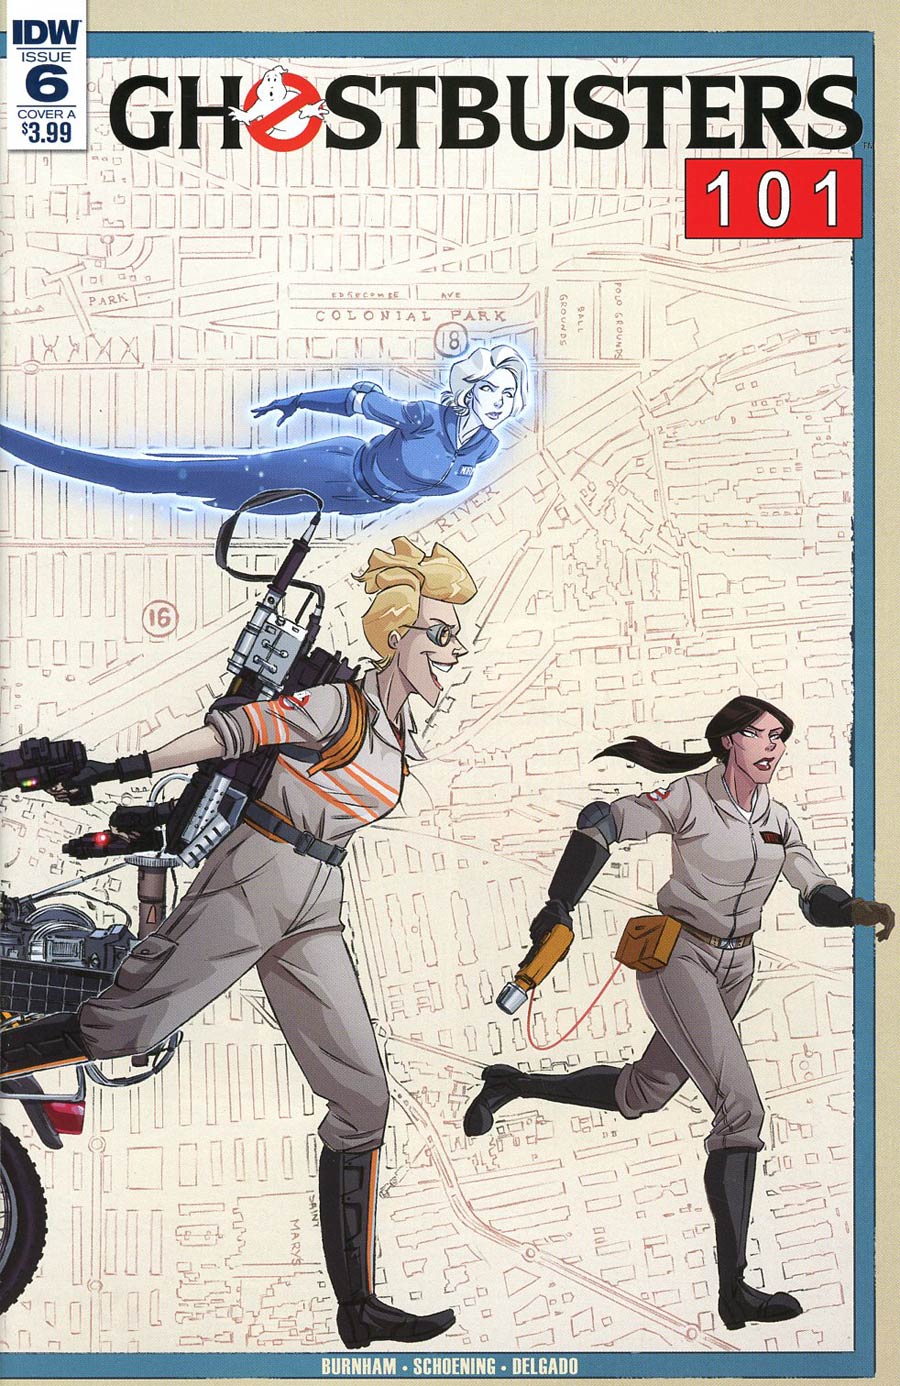 Ghostbusters 101 #6 Cover A Regular Dan Schoening Cover